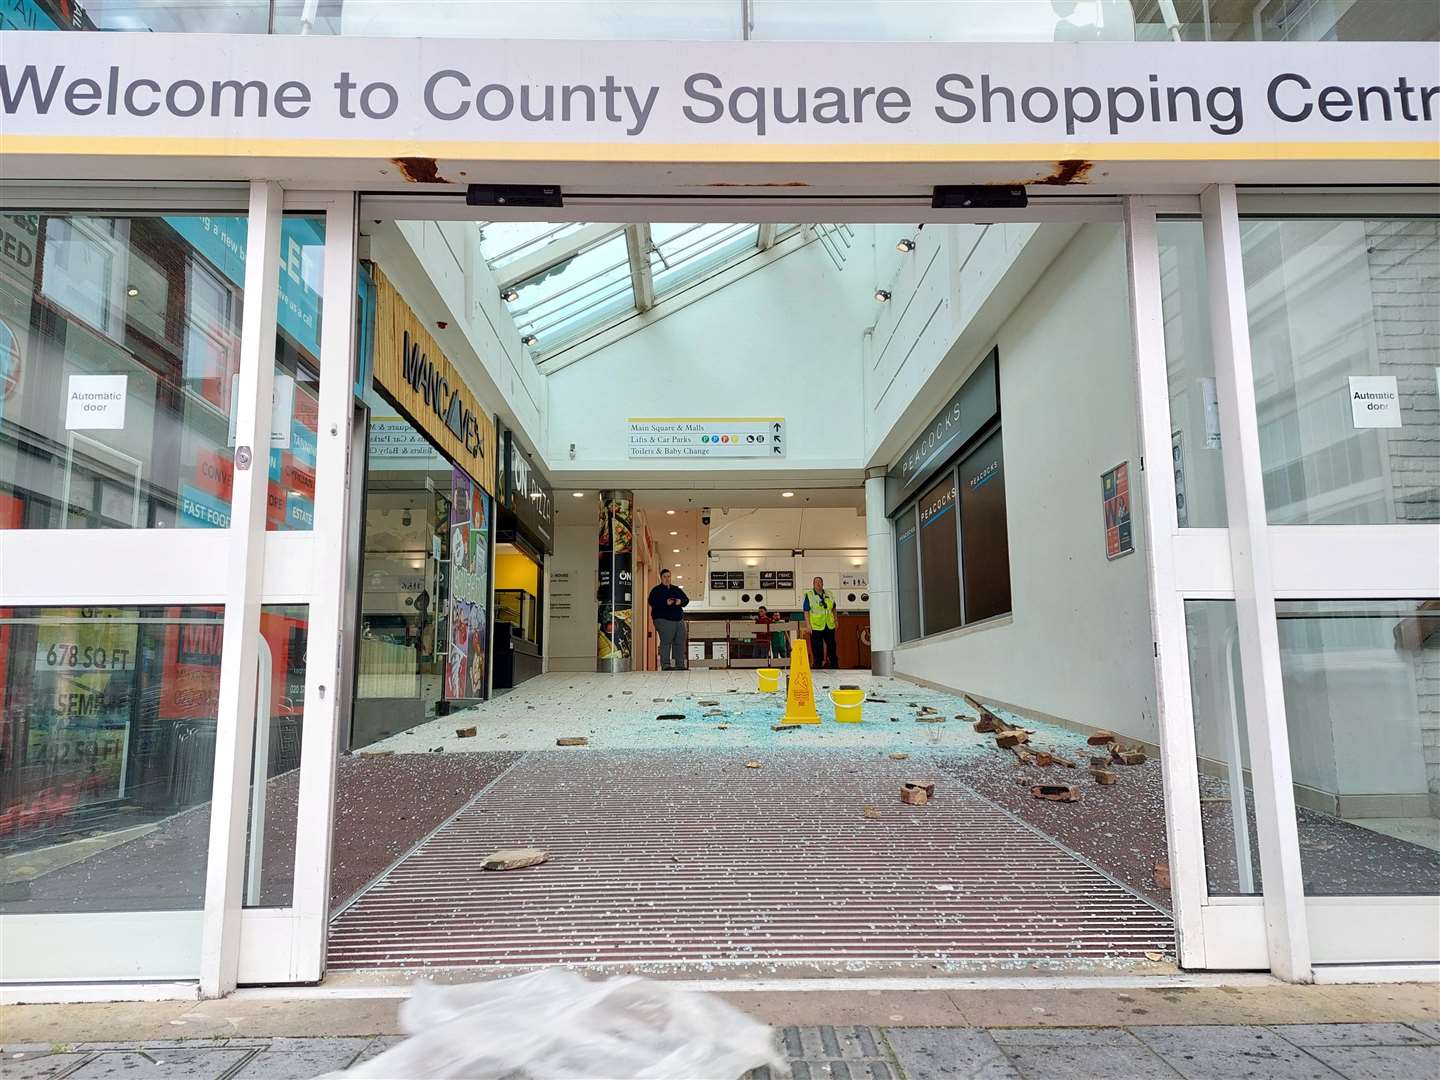 County Square Shopping Centre had to close on Friday due to a collapsed roof